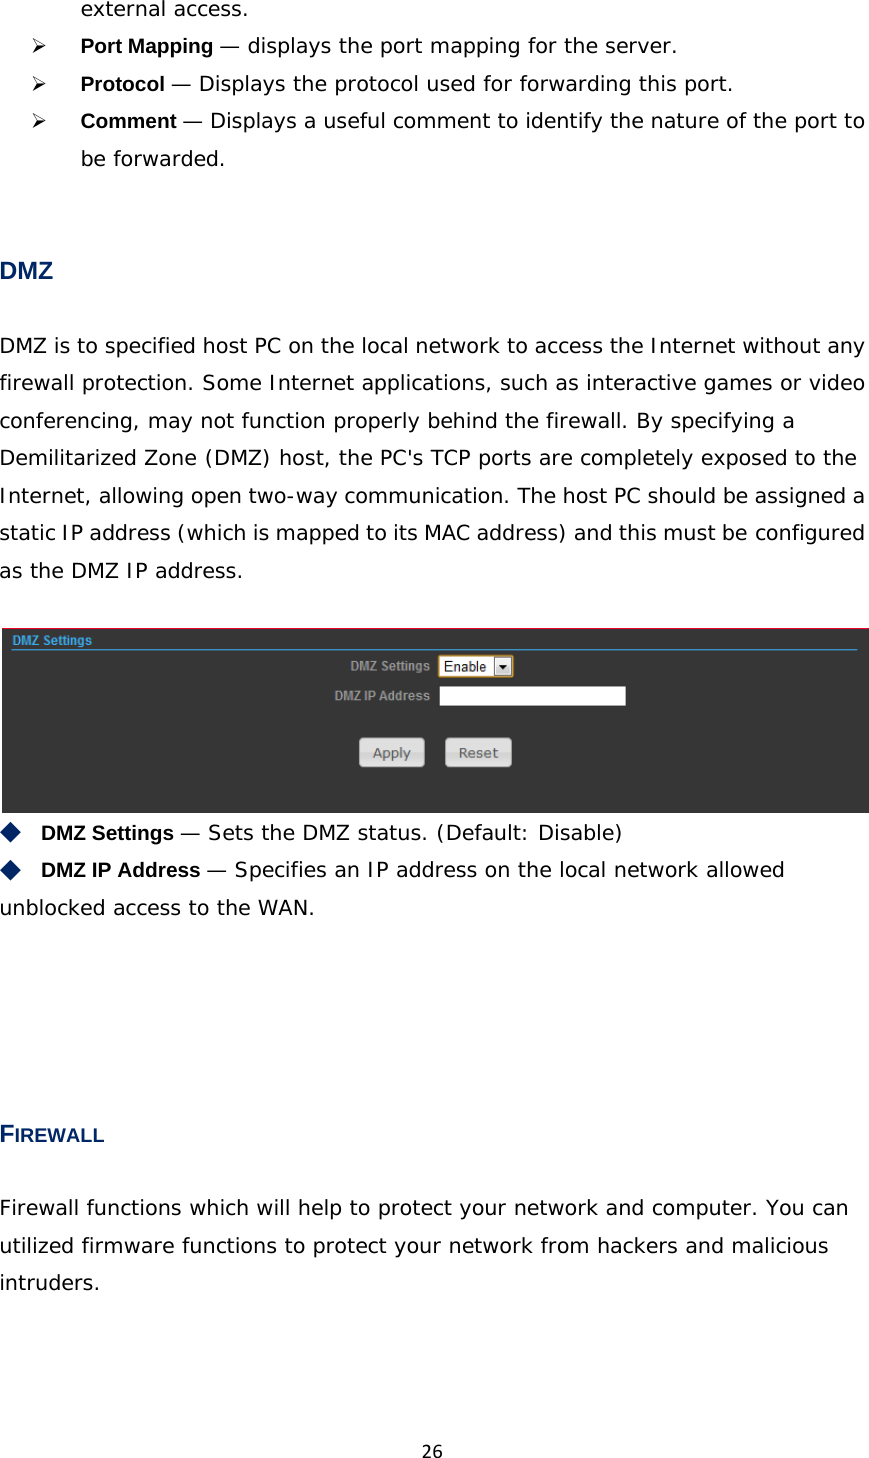 26external access.  Port Mapping — displays the port mapping for the server.  Protocol — Displays the protocol used for forwarding this port.  Comment — Displays a useful comment to identify the nature of the port to be forwarded.  DMZ DMZ is to specified host PC on the local network to access the Internet without any firewall protection. Some Internet applications, such as interactive games or video conferencing, may not function properly behind the firewall. By specifying a Demilitarized Zone (DMZ) host, the PC&apos;s TCP ports are completely exposed to the Internet, allowing open two-way communication. The host PC should be assigned a static IP address (which is mapped to its MAC address) and this must be configured as the DMZ IP address.   ◆　DMZ Settings — Sets the DMZ status. (Default: Disable) ◆　DMZ IP Address — Specifies an IP address on the local network allowed unblocked access to the WAN.     FIREWALL Firewall functions which will help to protect your network and computer. You can utilized firmware functions to protect your network from hackers and malicious intruders. 